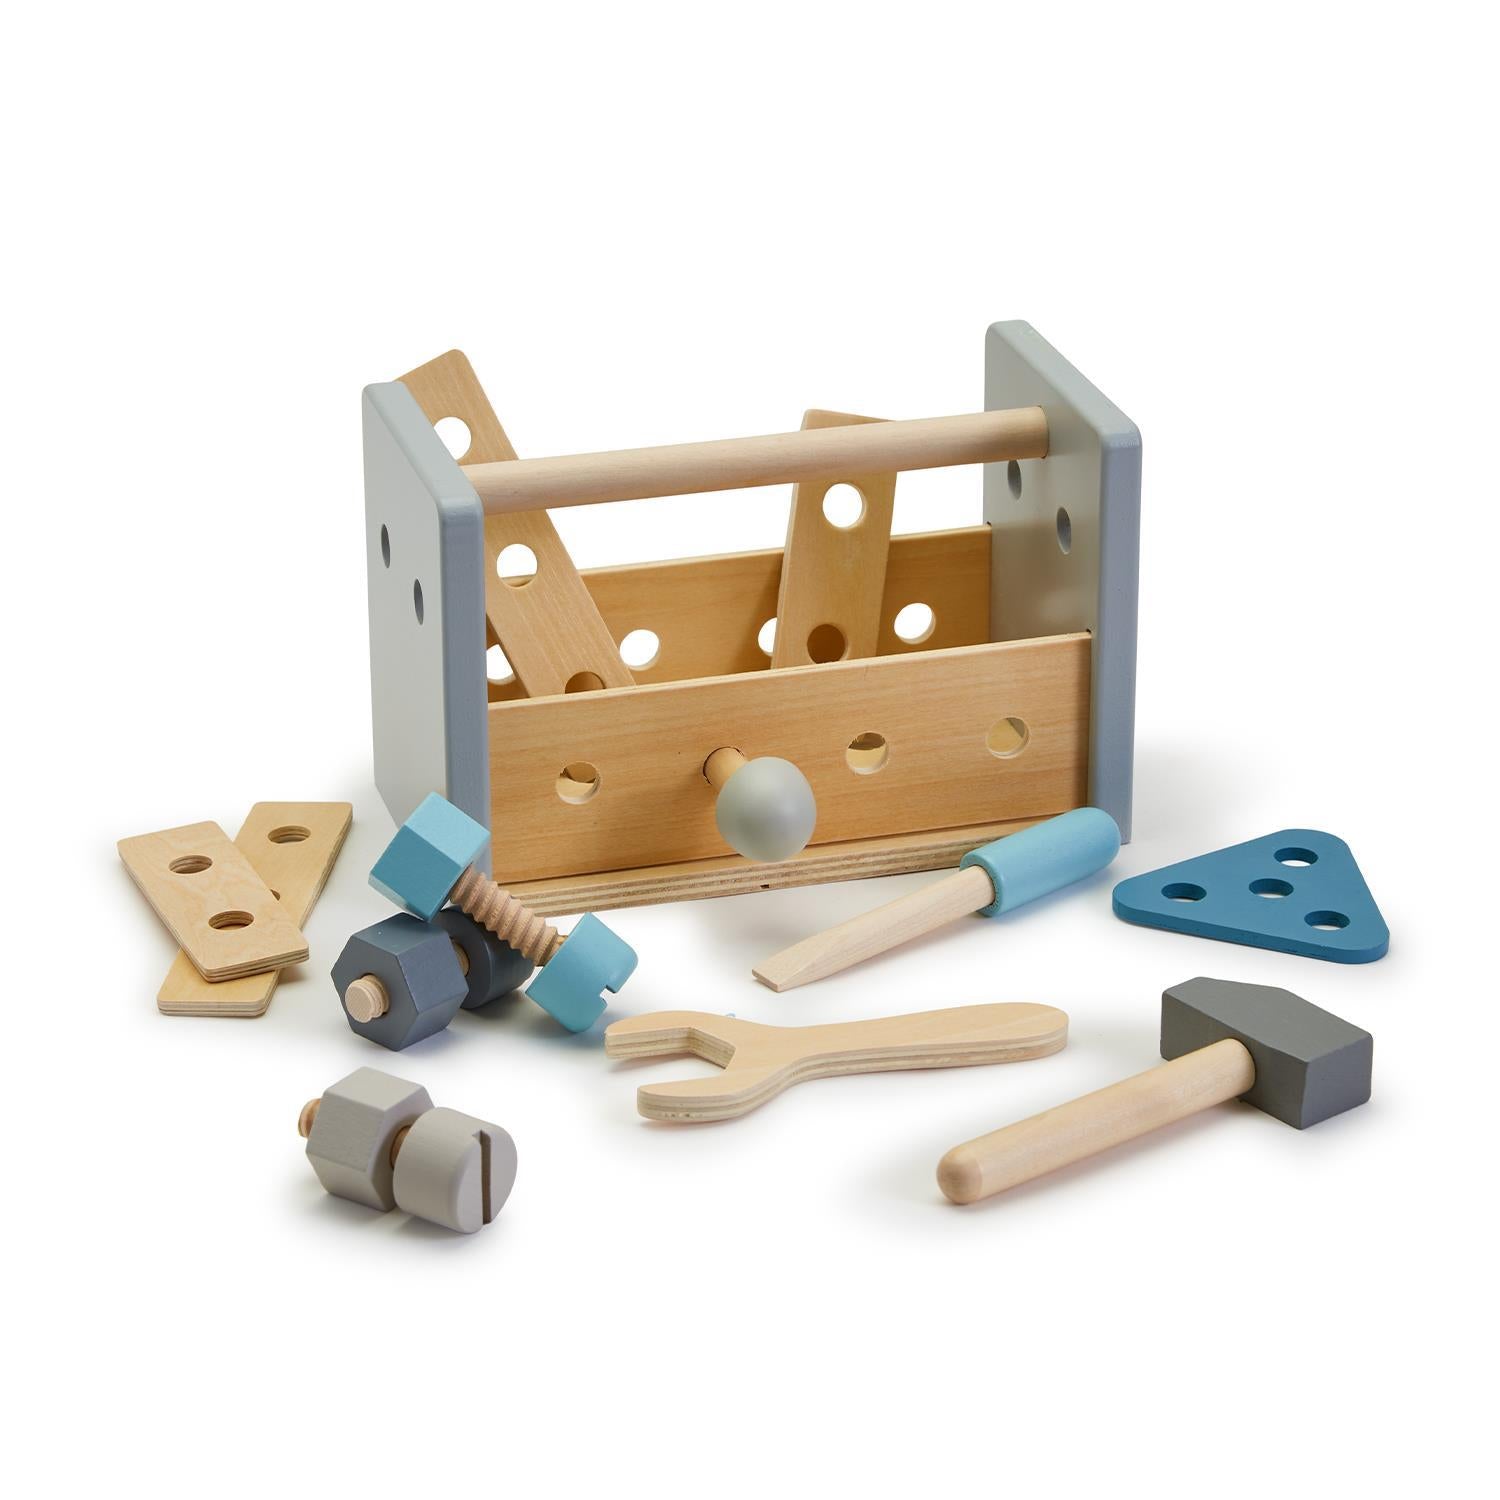 Two's Company Cupcakes & Cartwheels 2-In-1 Tool Bench and Box toy for kids ages 3 and up